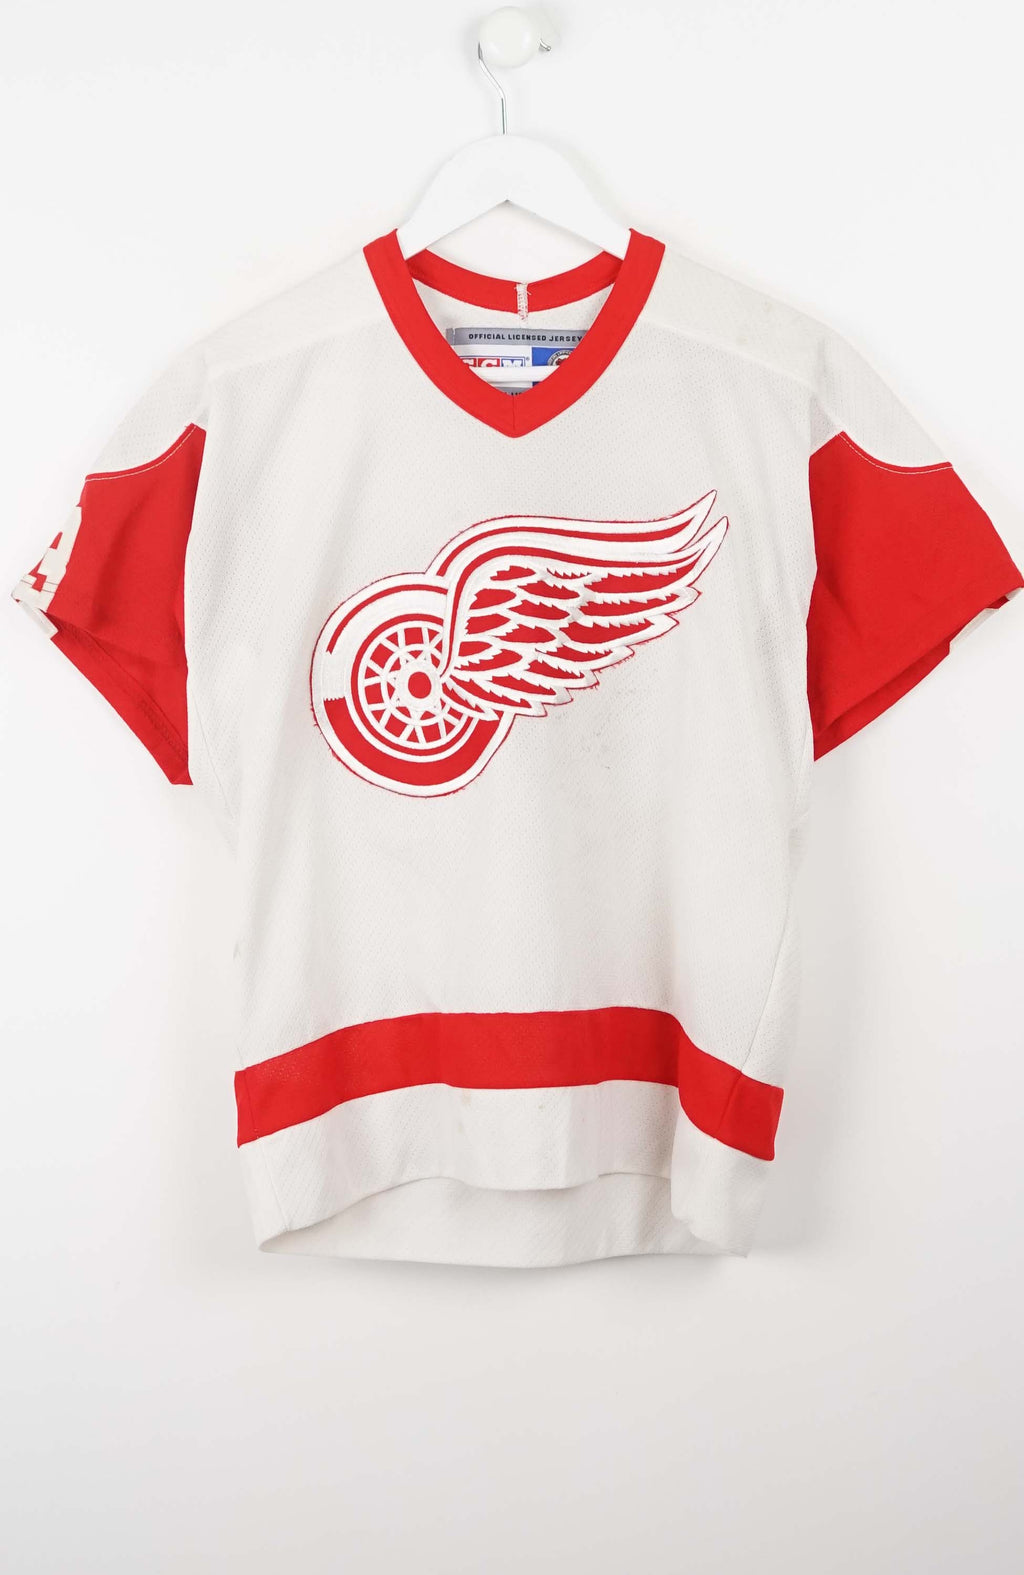 VINTAGE NHL DETROIT RED WINGS JERSEY (S) 